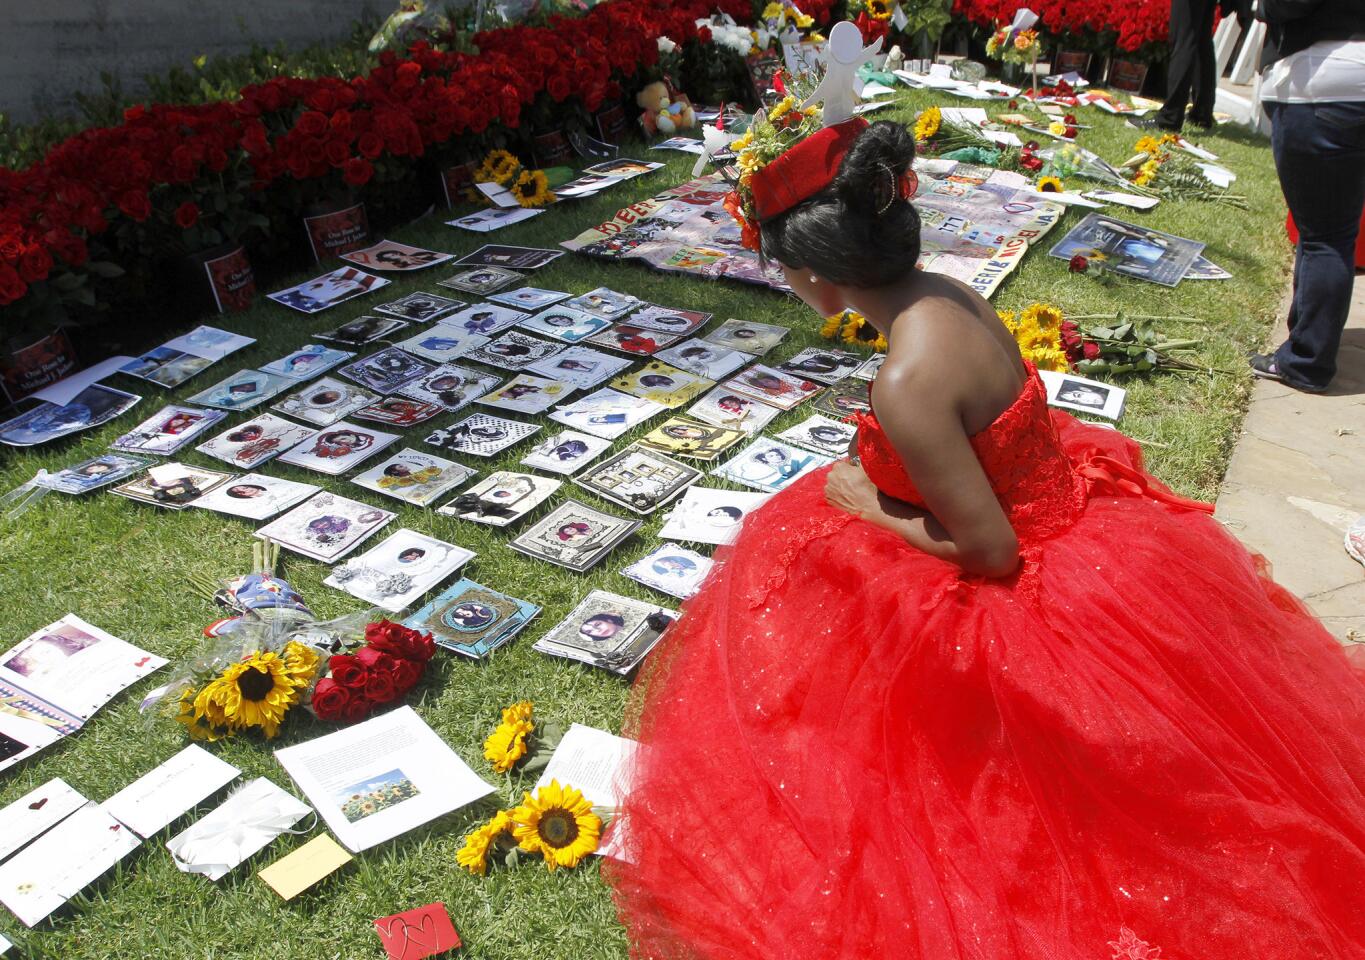 Raquel Jean Joseph of New York looks at items left at the Michael Jackson fan memorial on the 5th anniversary of Jackson's death, at Forest Lawn Memorial Park in Glendale on Wednesday, June 25, 2014. Jackson is buried at the Great Mausoleum at Forest Lawn.